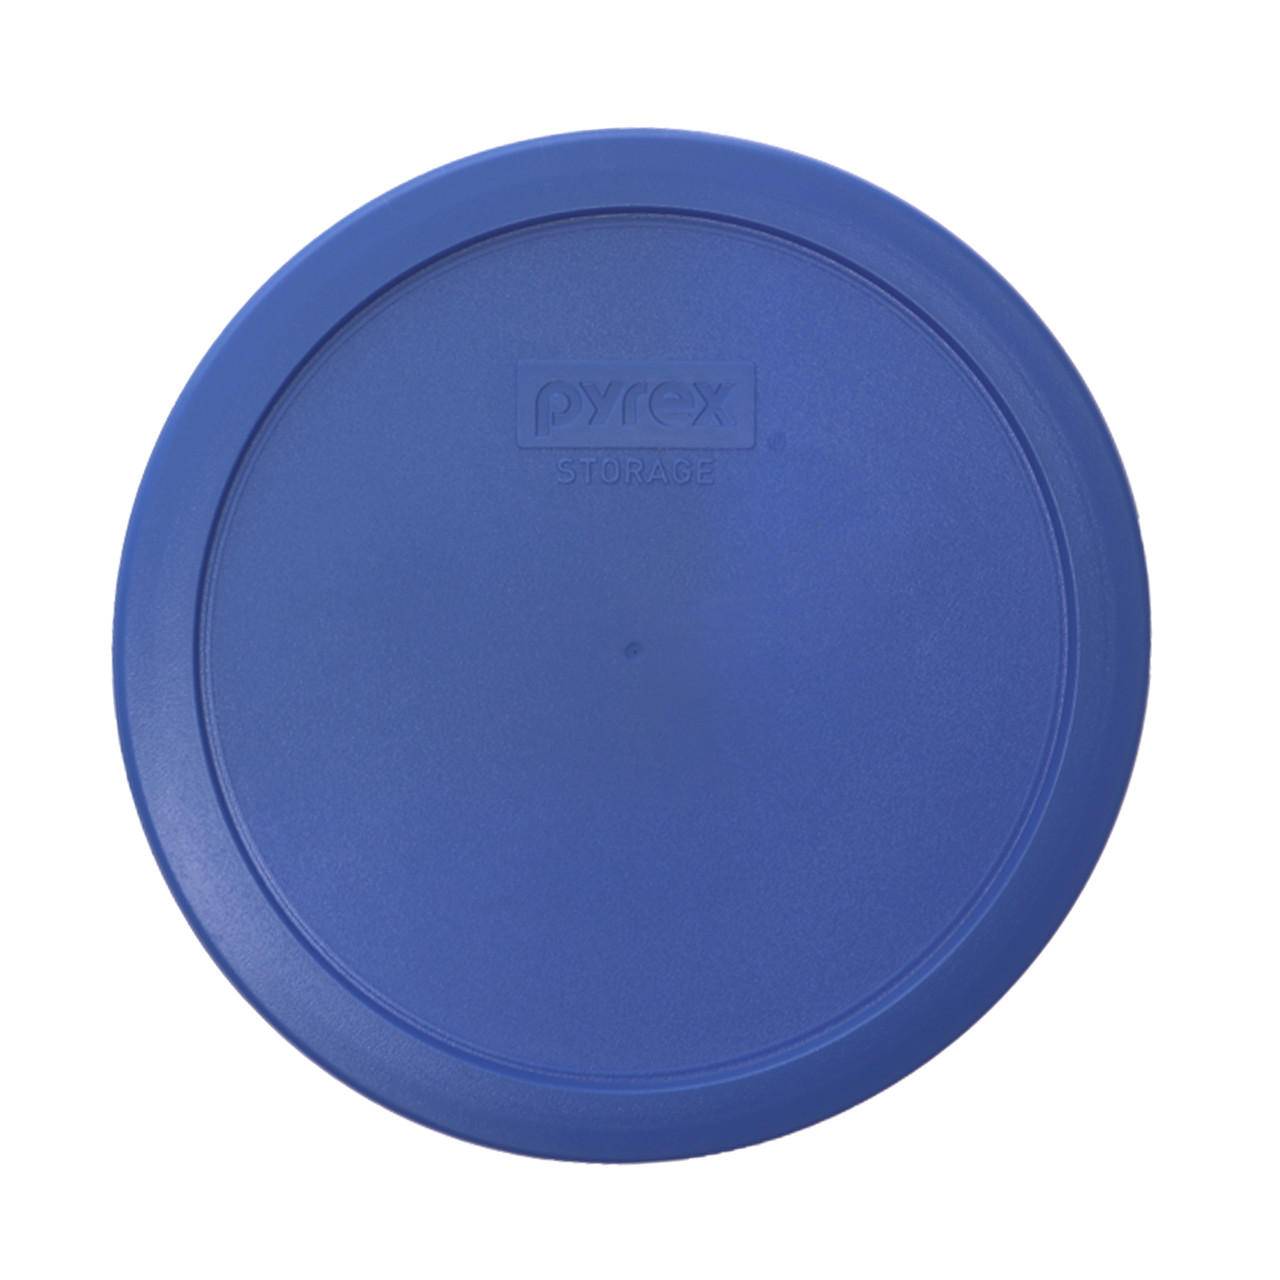 Pyrex 7203 7-Cup Round Glass Storage Bowl and 7402-PC Marine Blue Plastic Lid Cover (2-Pack)